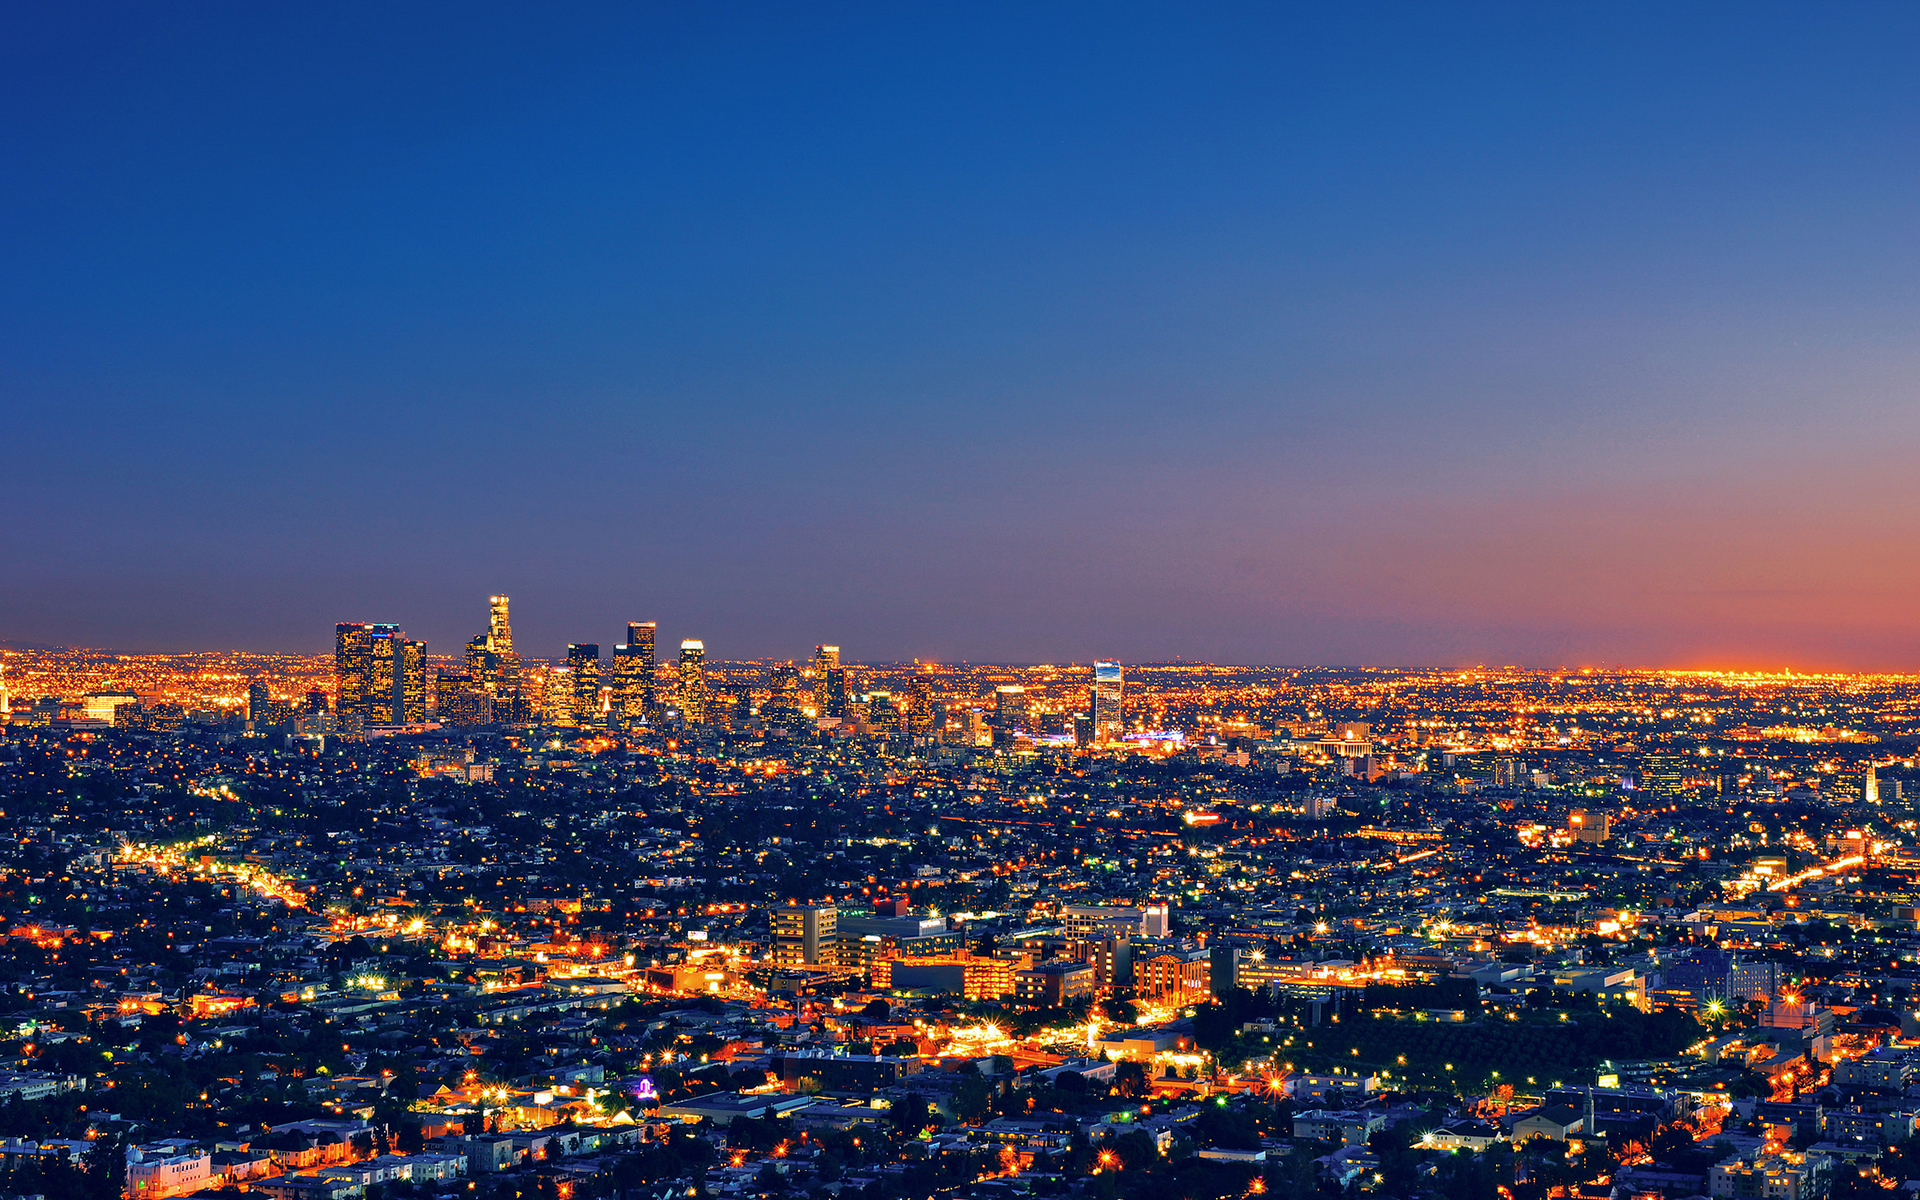 los, Angeles, Cities, Architecture, Buildings, Skyscrapers, Night, Lights, Sunset, Sunrise Wallpaper HD / Desktop and Mobile Background